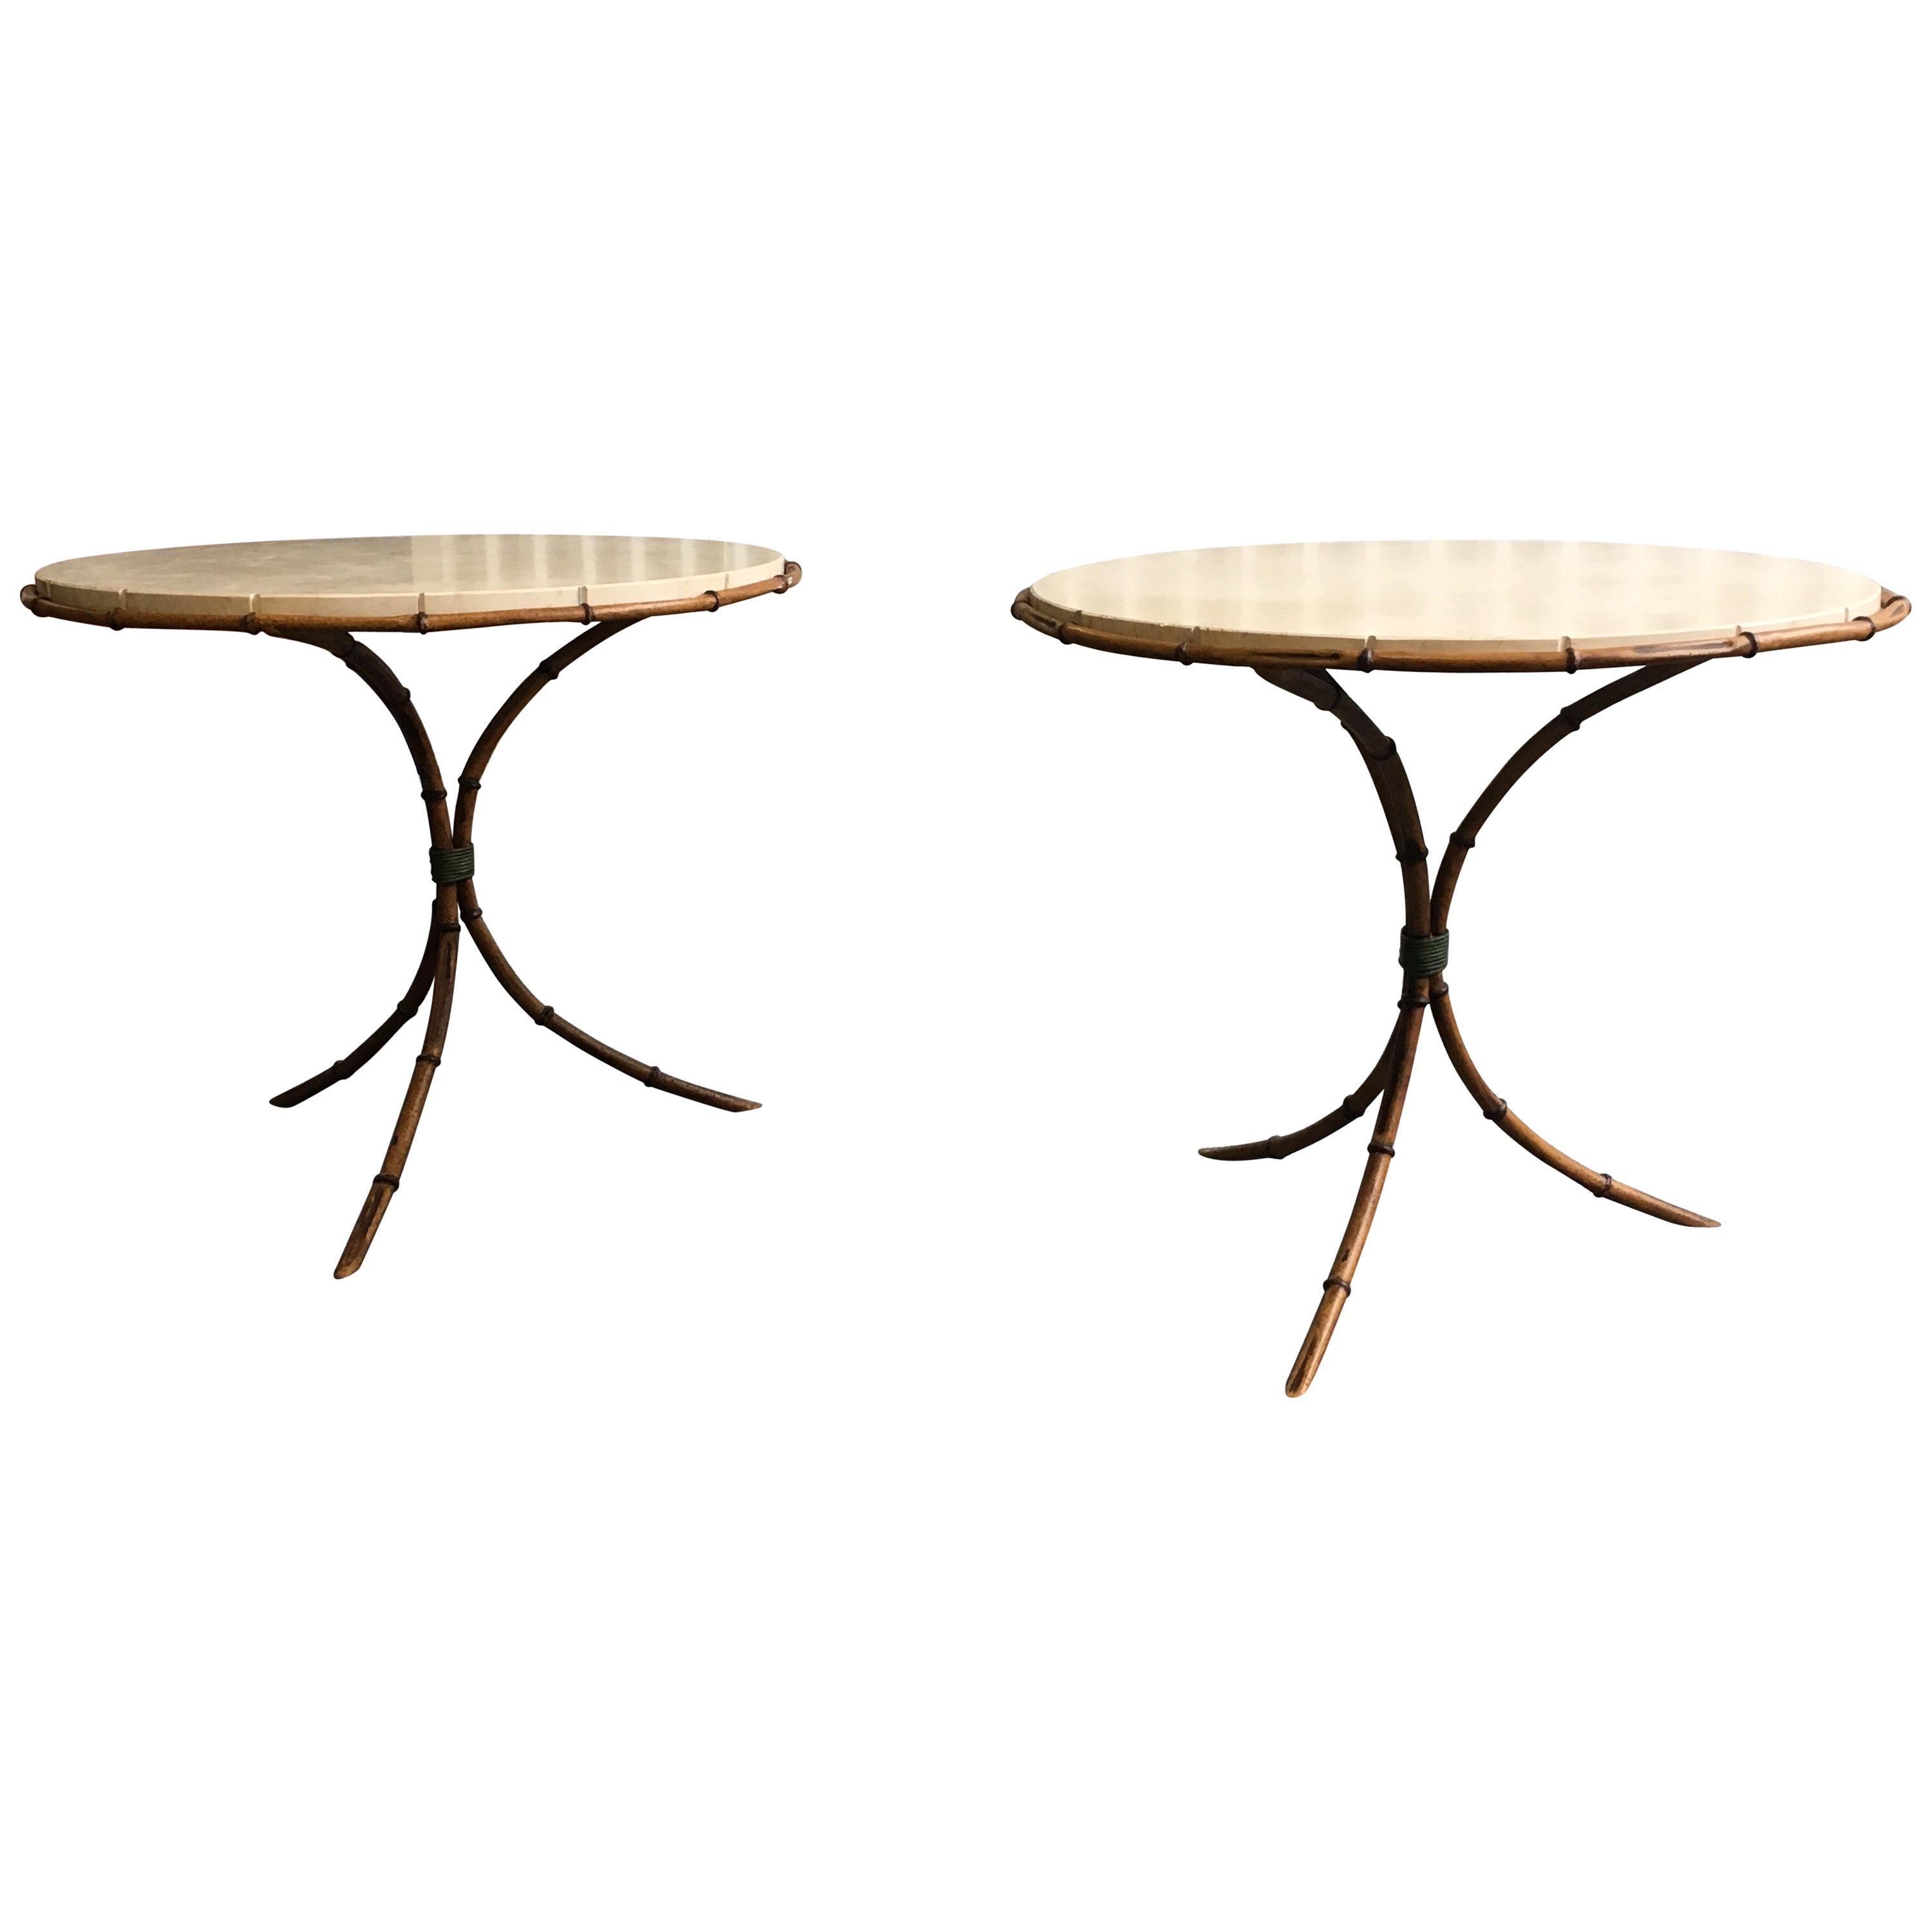 Pair of Travertine Top Bamboo Tripod Base Tables